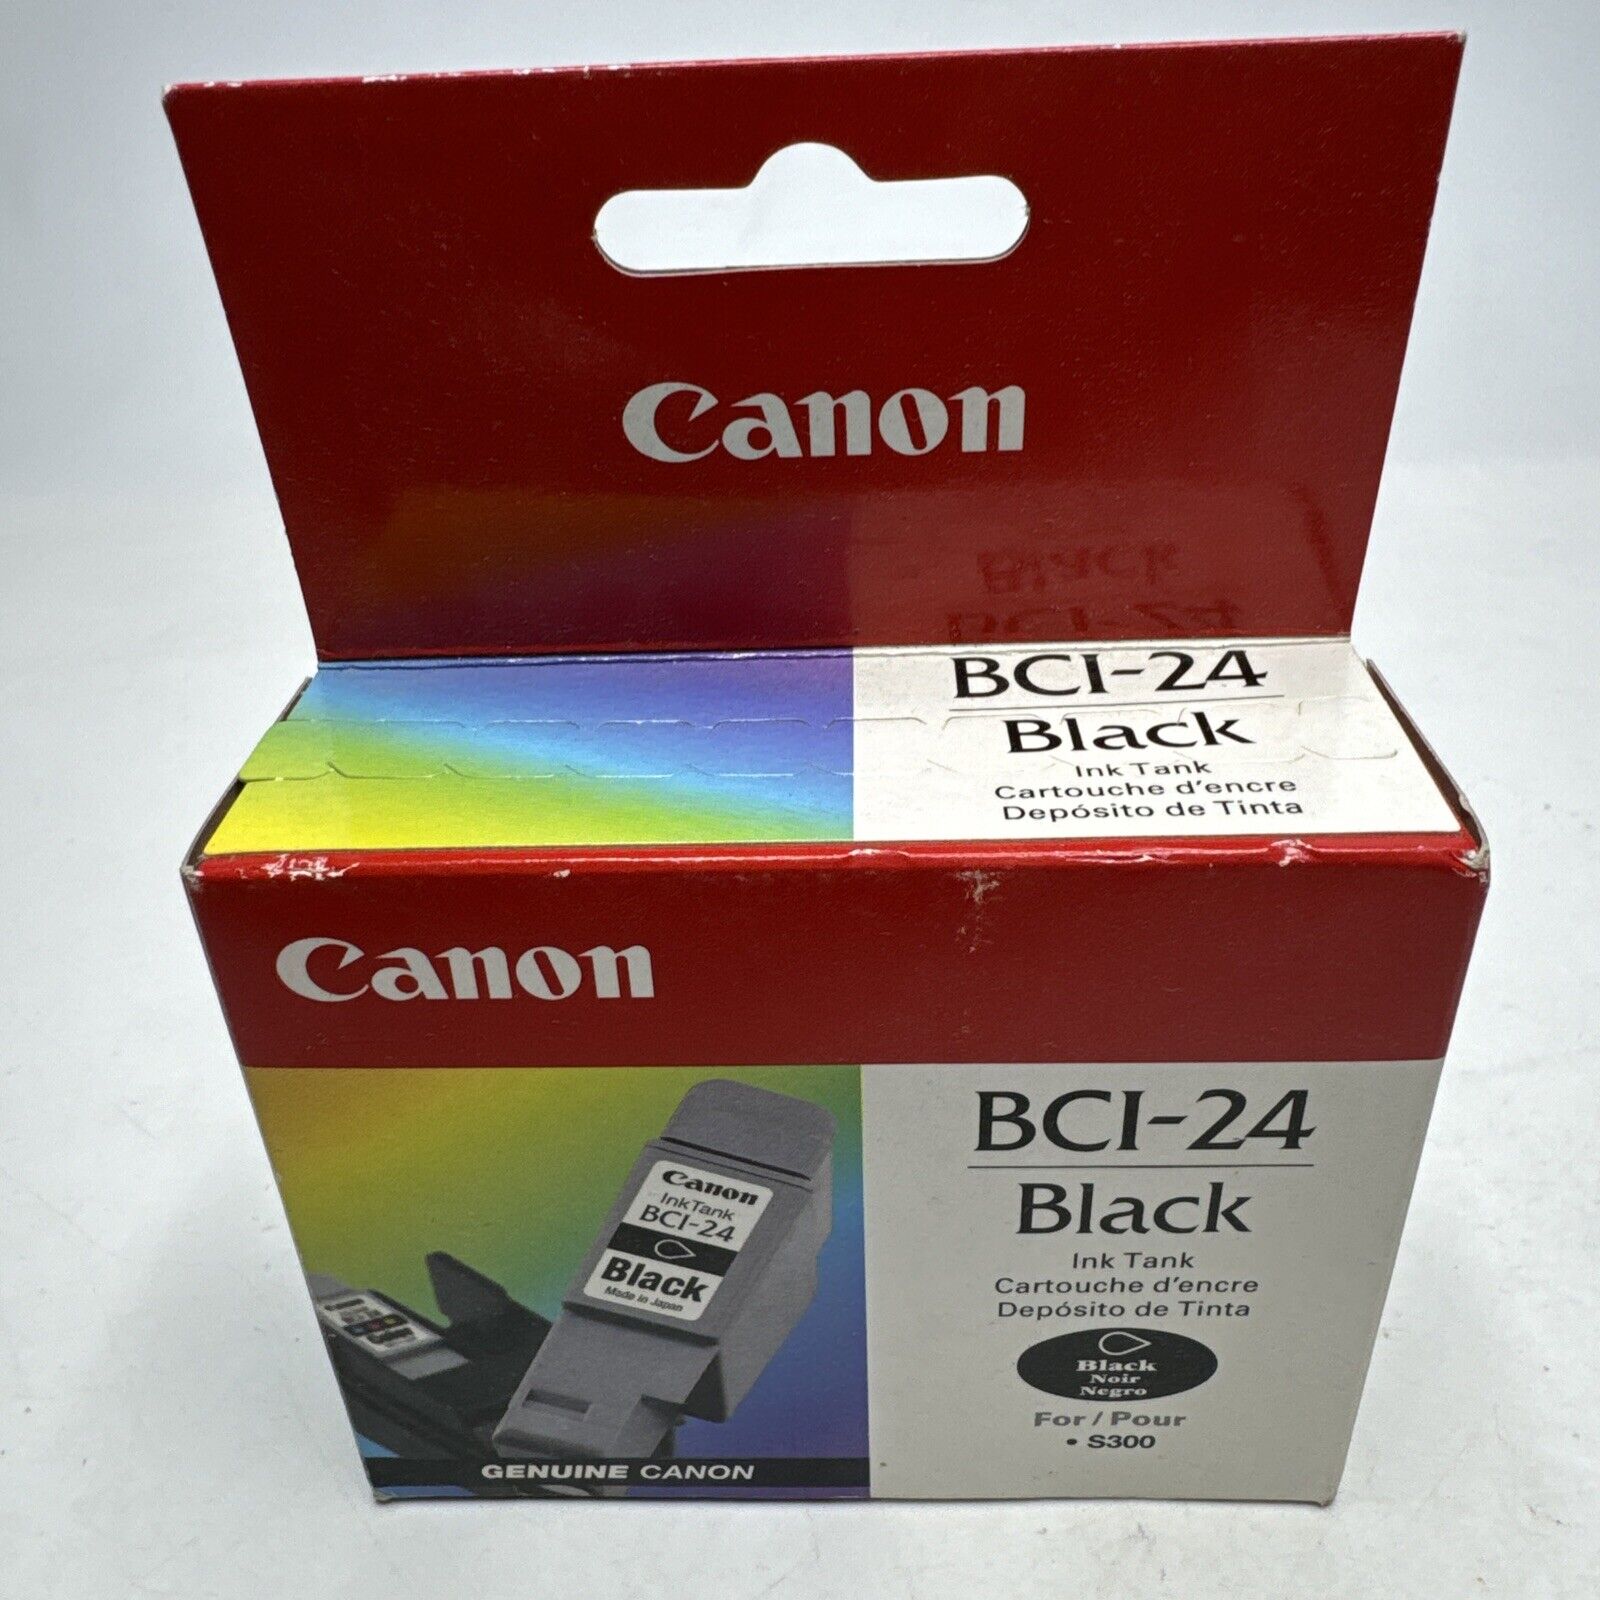 New Genuine Canon BCI-24 Black Ink tank Cartridges Sealed. Fast Ship